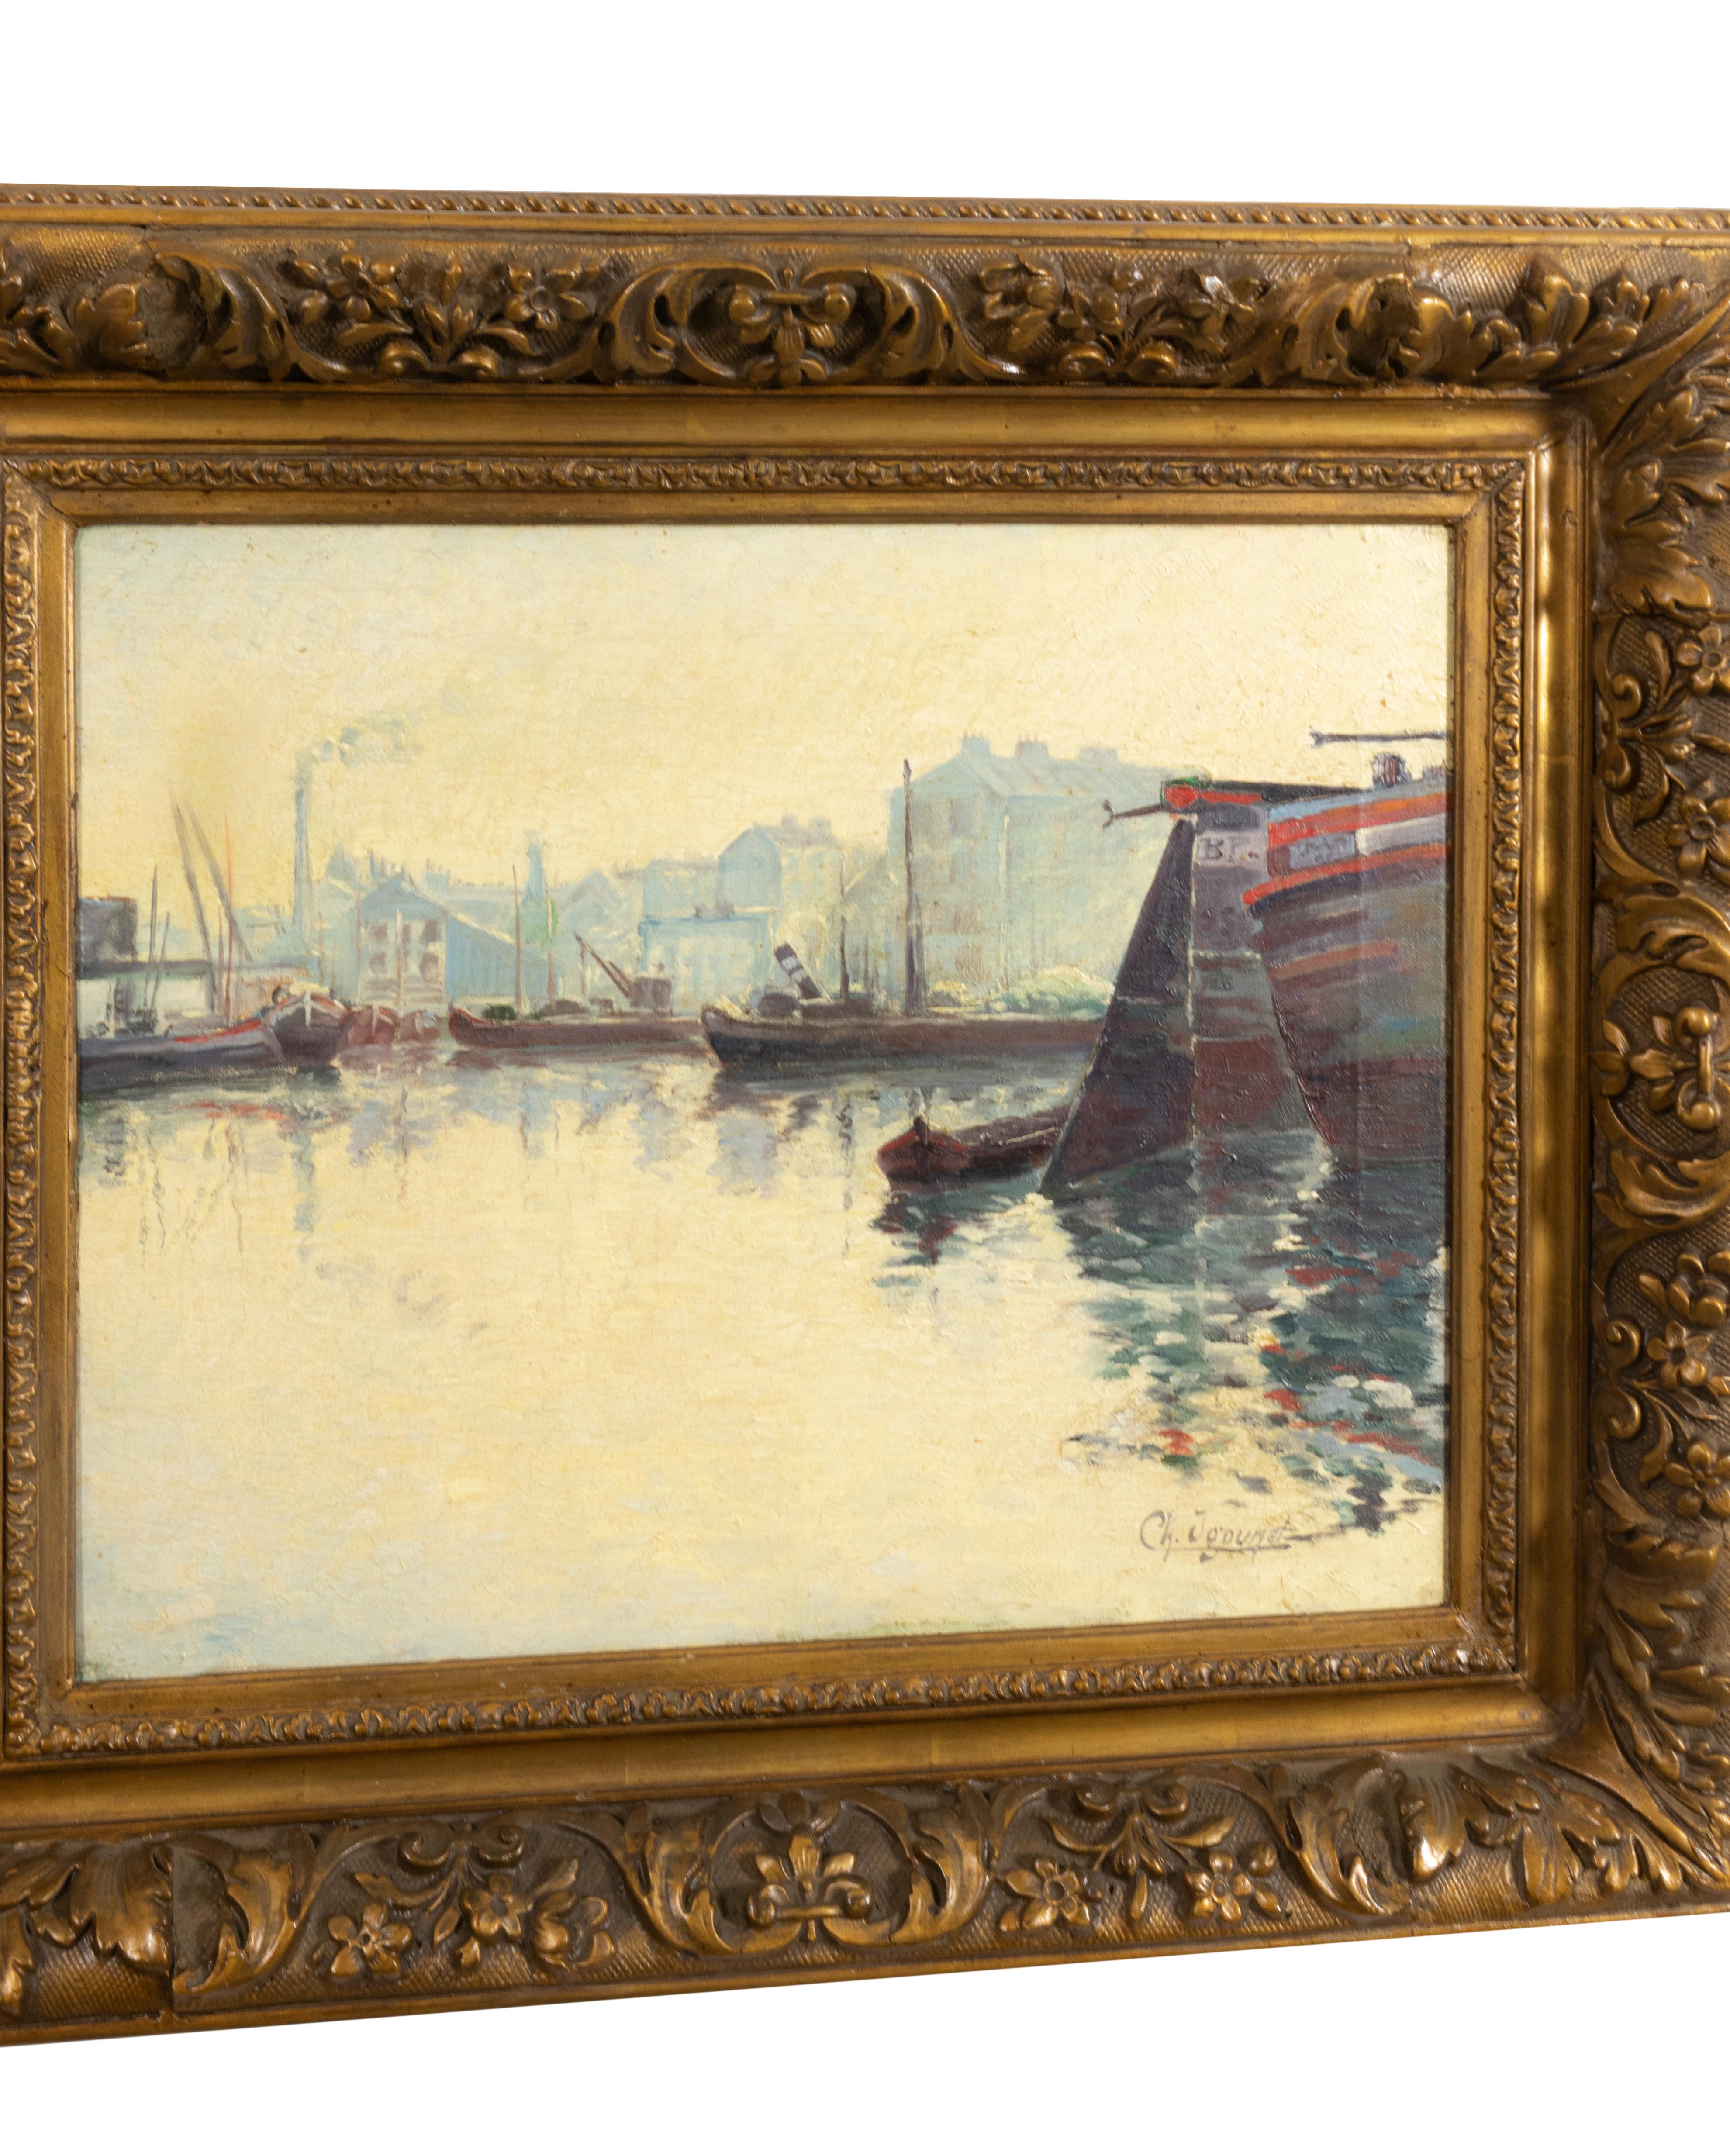 An exquisite French Impressionist painting with a nautical theme and somber boats on the pier - a serene seascape bearing the signature 'C H. Igounet' by renowned Impressionist painter Charles André Igounet de Villers (1881-1944), a prominent member